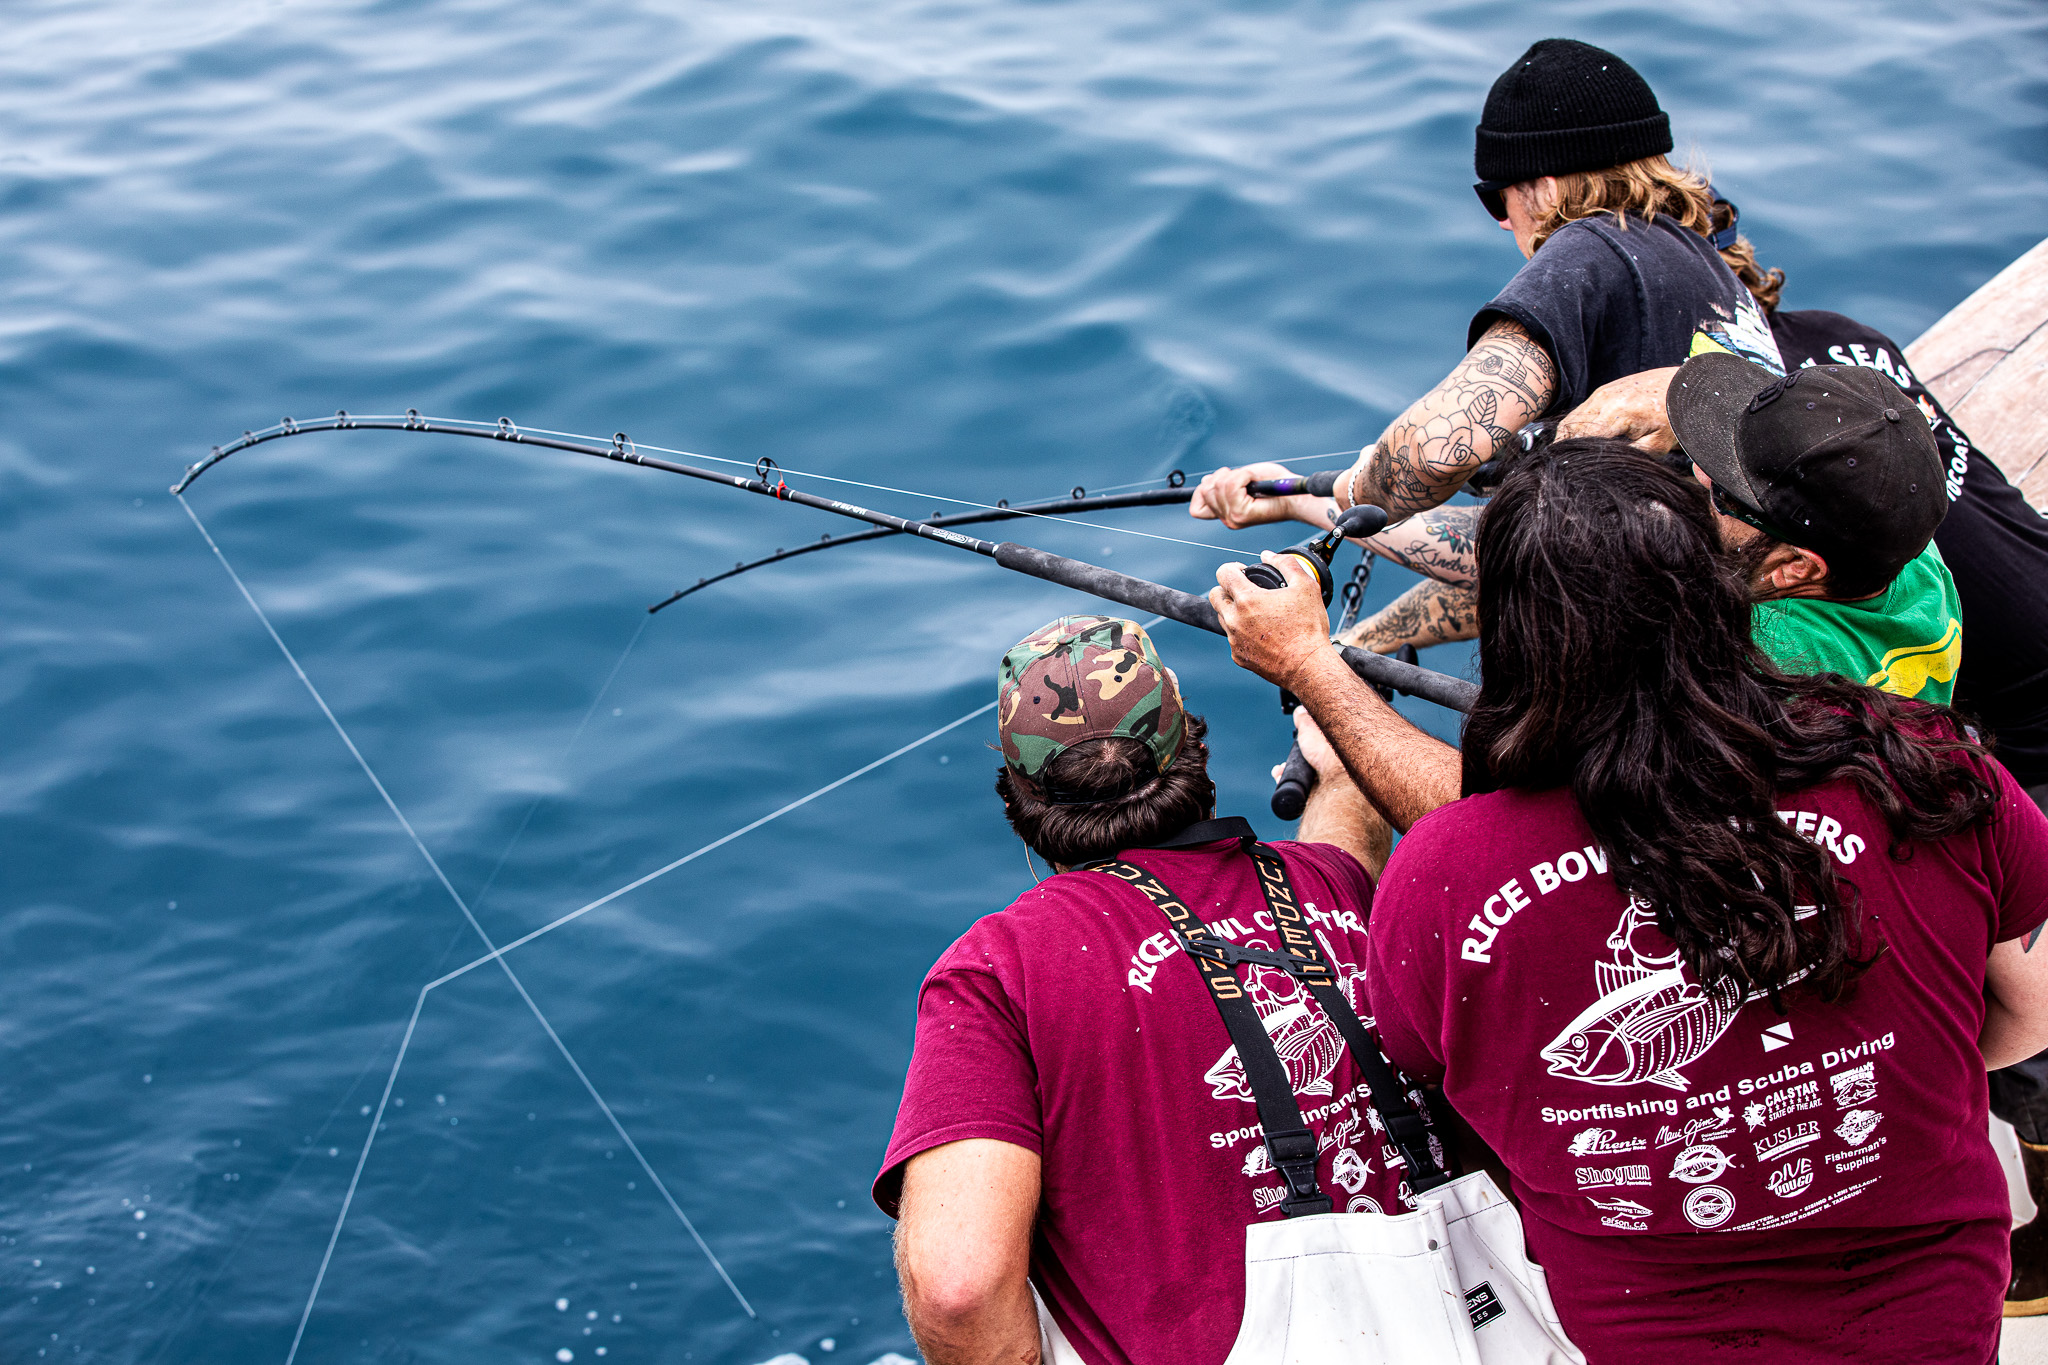 Deckhands help clients avoid tangling their lines.